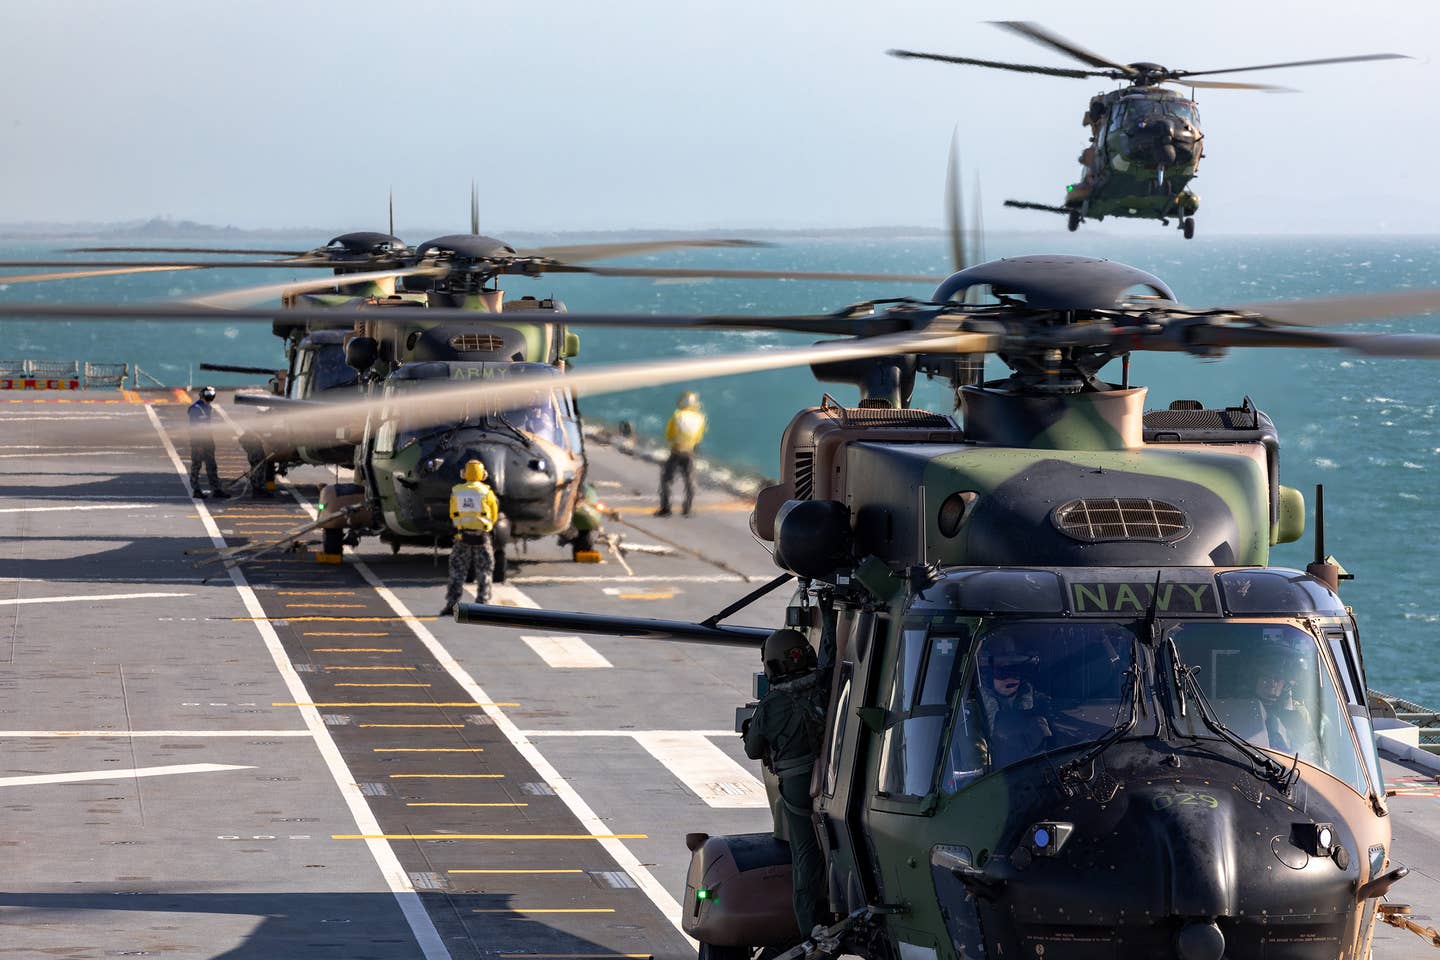 A flight of four Royal Australian Navy and Australian Army MRH90 Taipan helicopters operate off the flight deck of the <em>Canberra</em> class amphibious assault ship HMAS Adelaide. <em>COMMONWEALTH OF AUSTRALIA, DEPARTMENT OF DEFENSE</em><br>